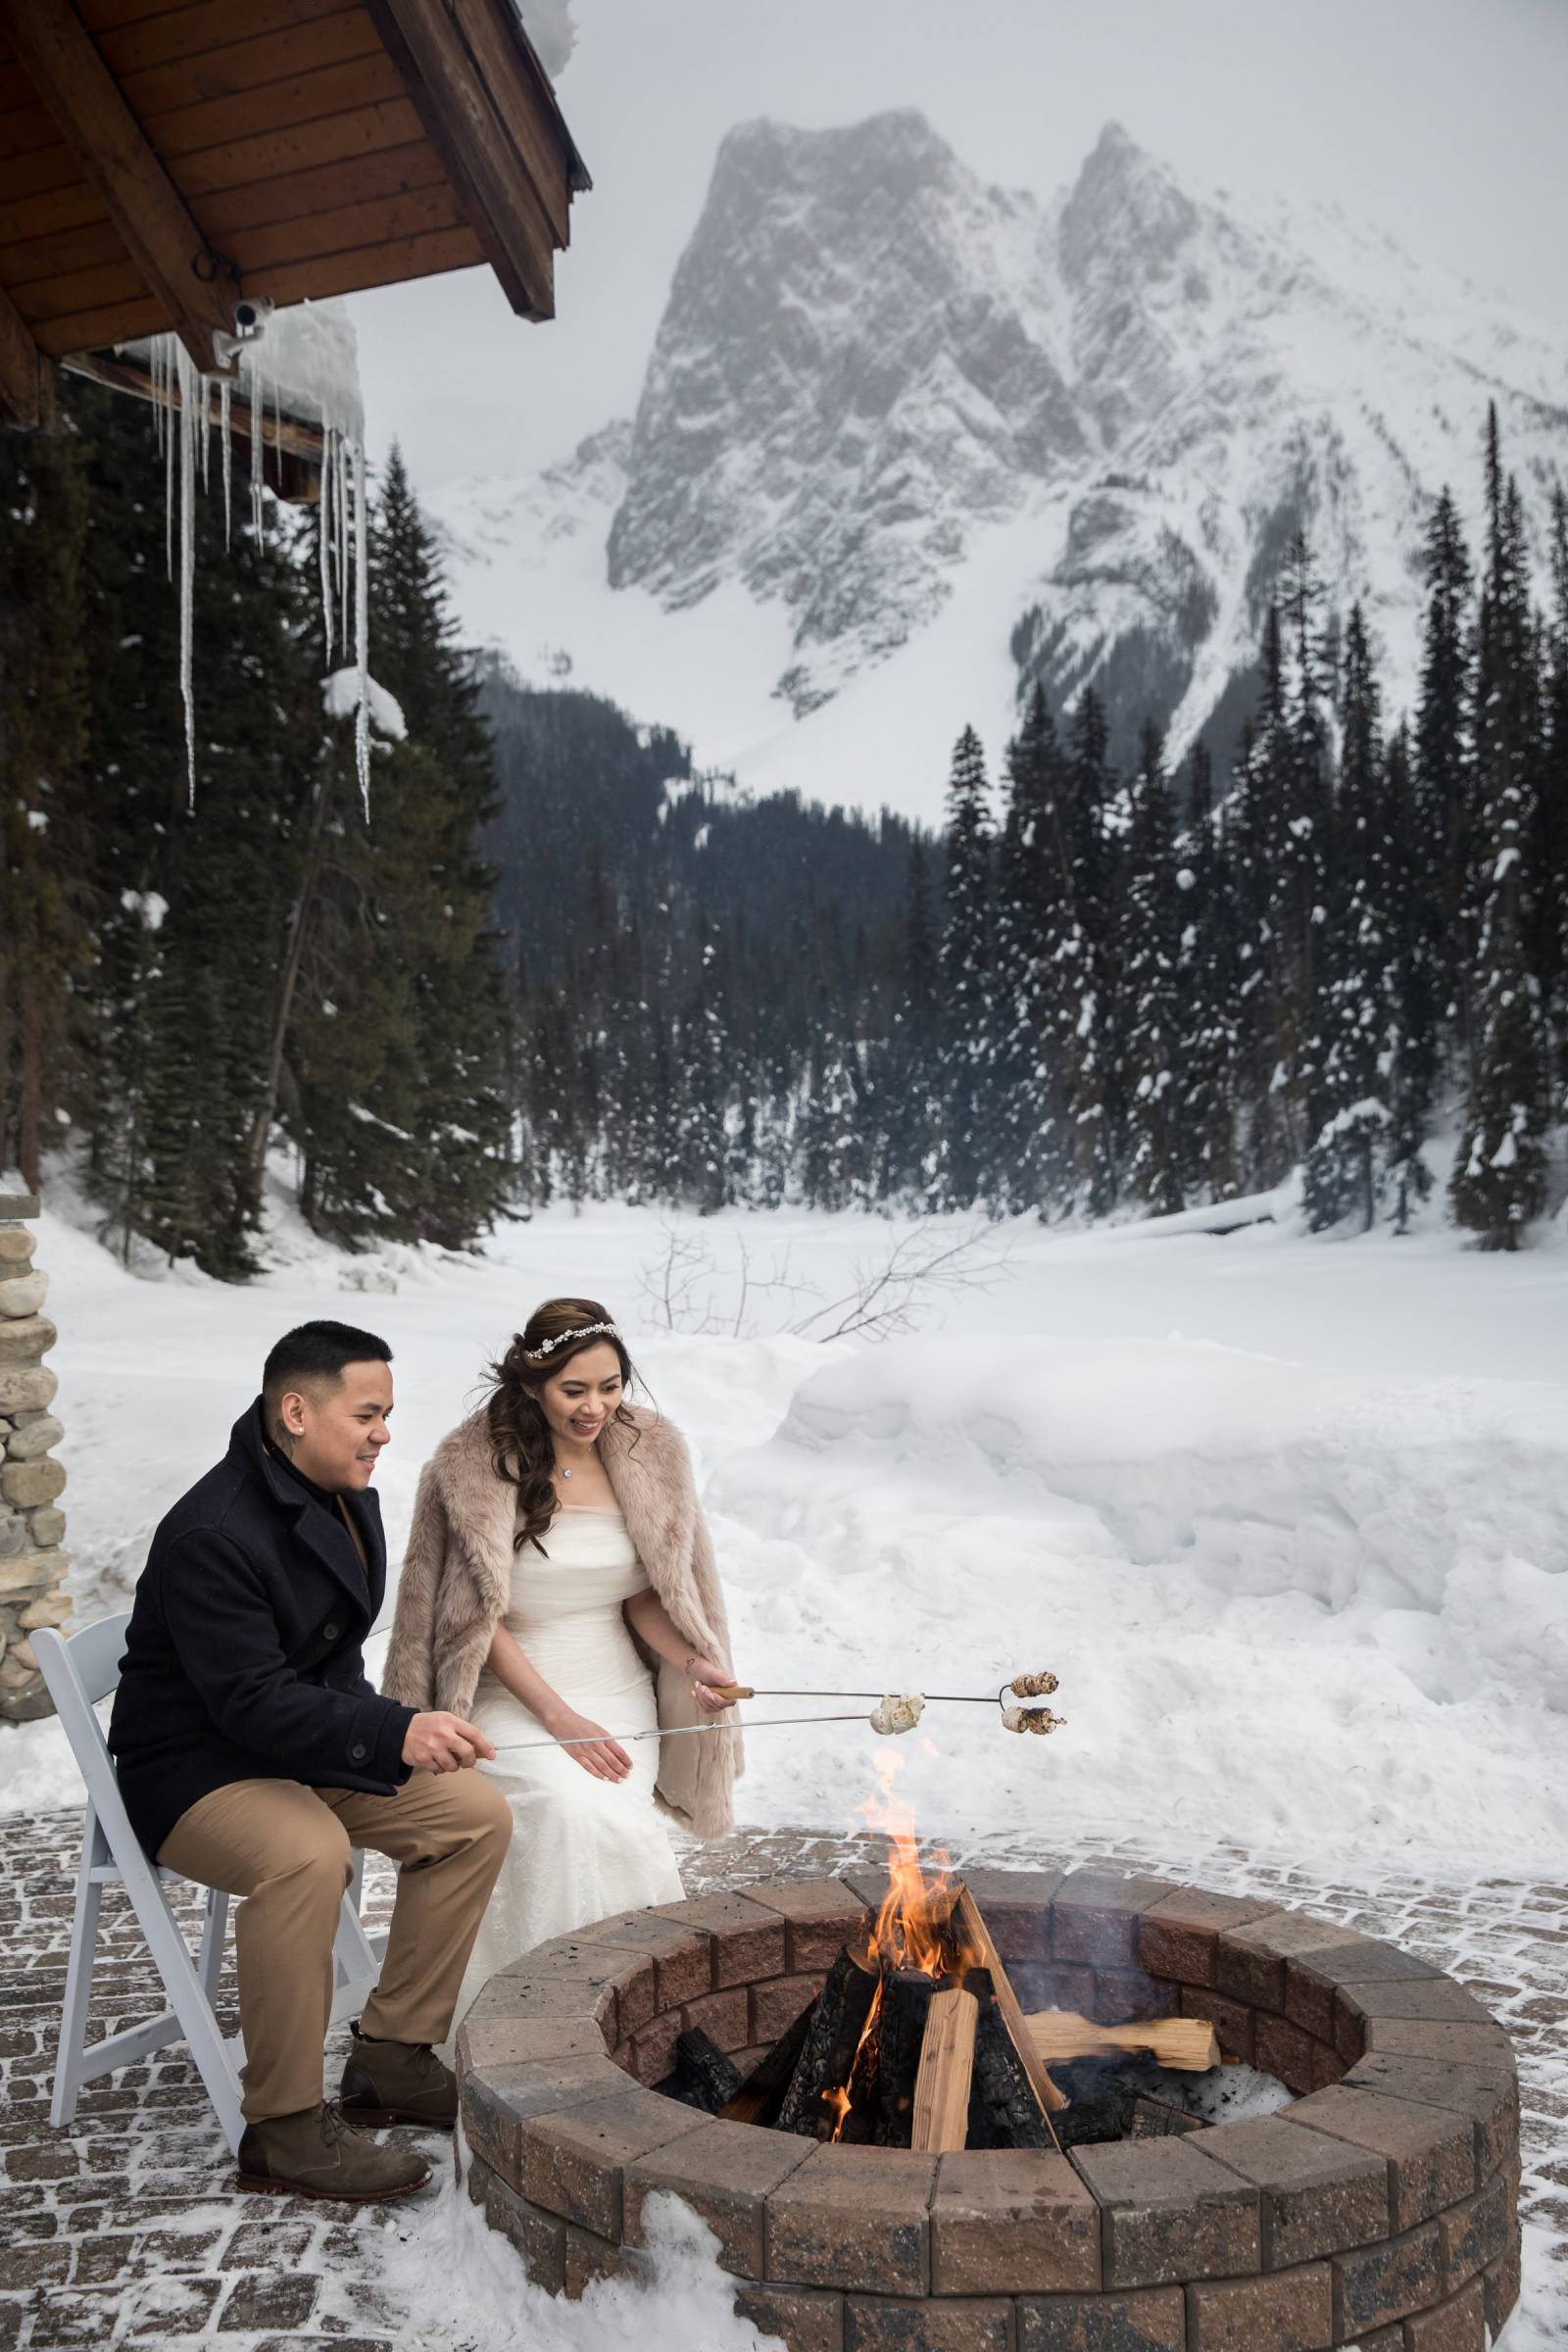 Eloping in Banff National Park, Eloping in the Canadian Rockies, Banff Elopement Photographer, Banff